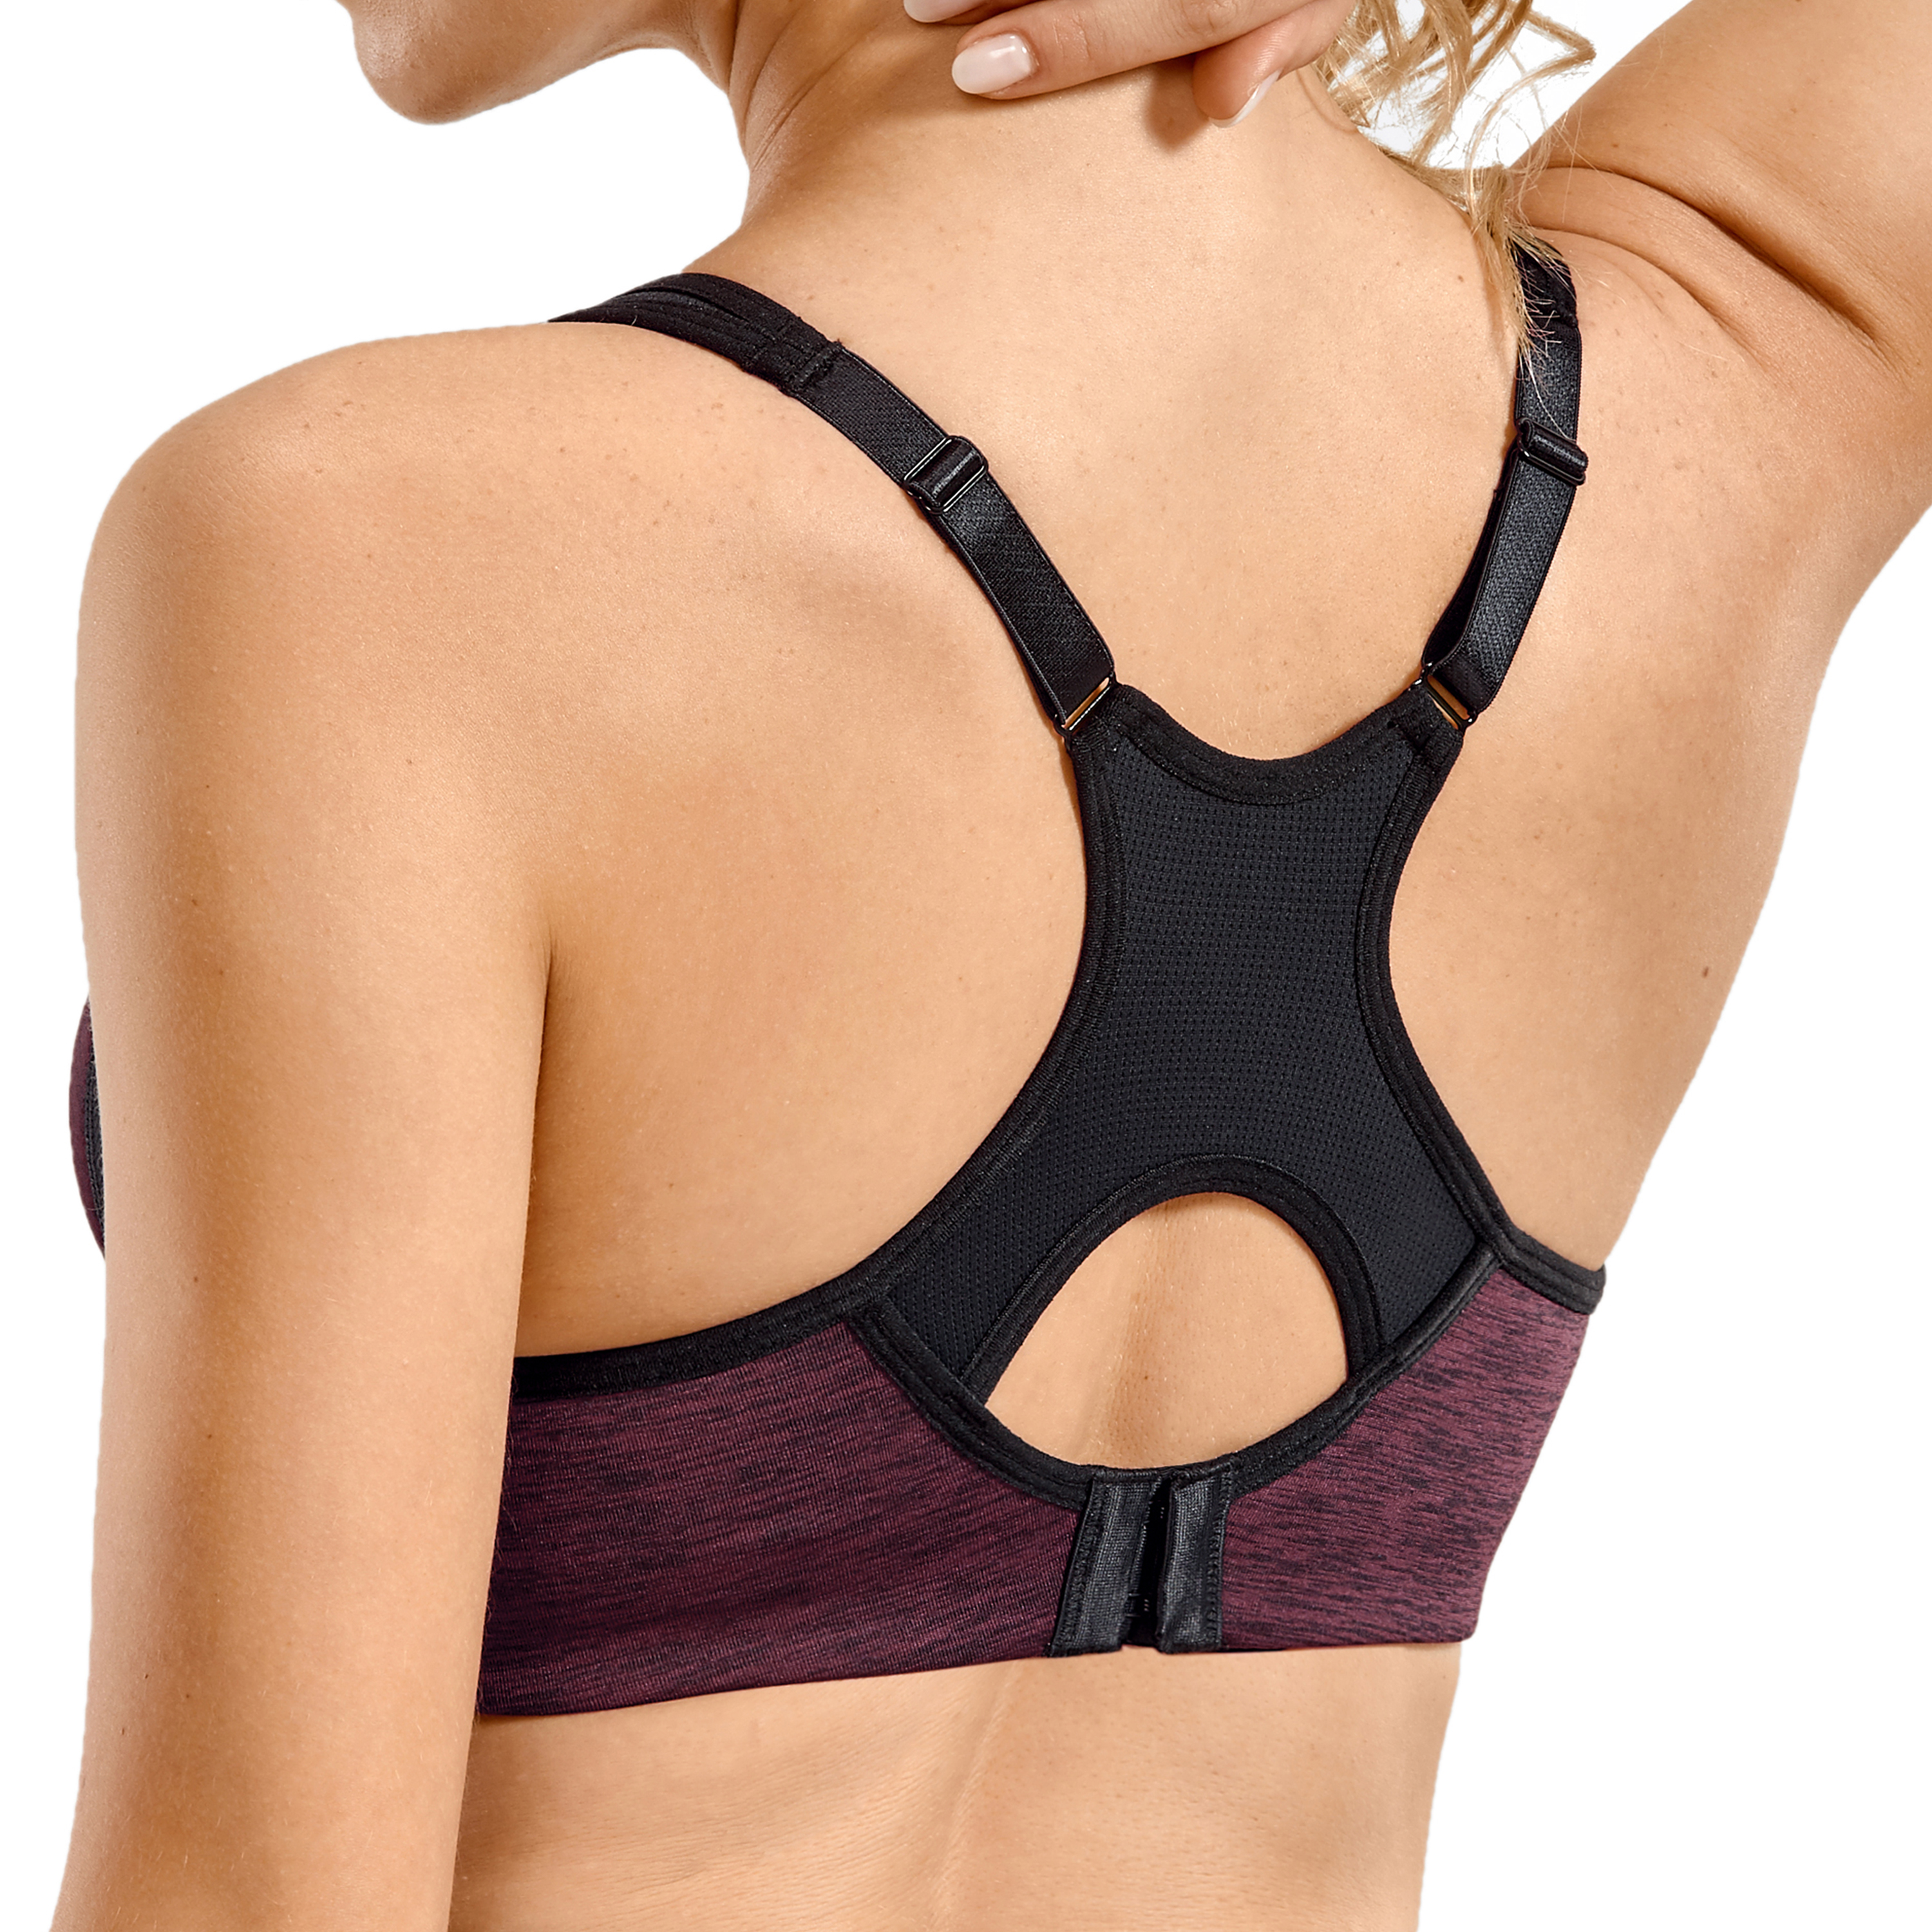 SYROKAN Women's Full Support High Impact Racerback Lined Underwire